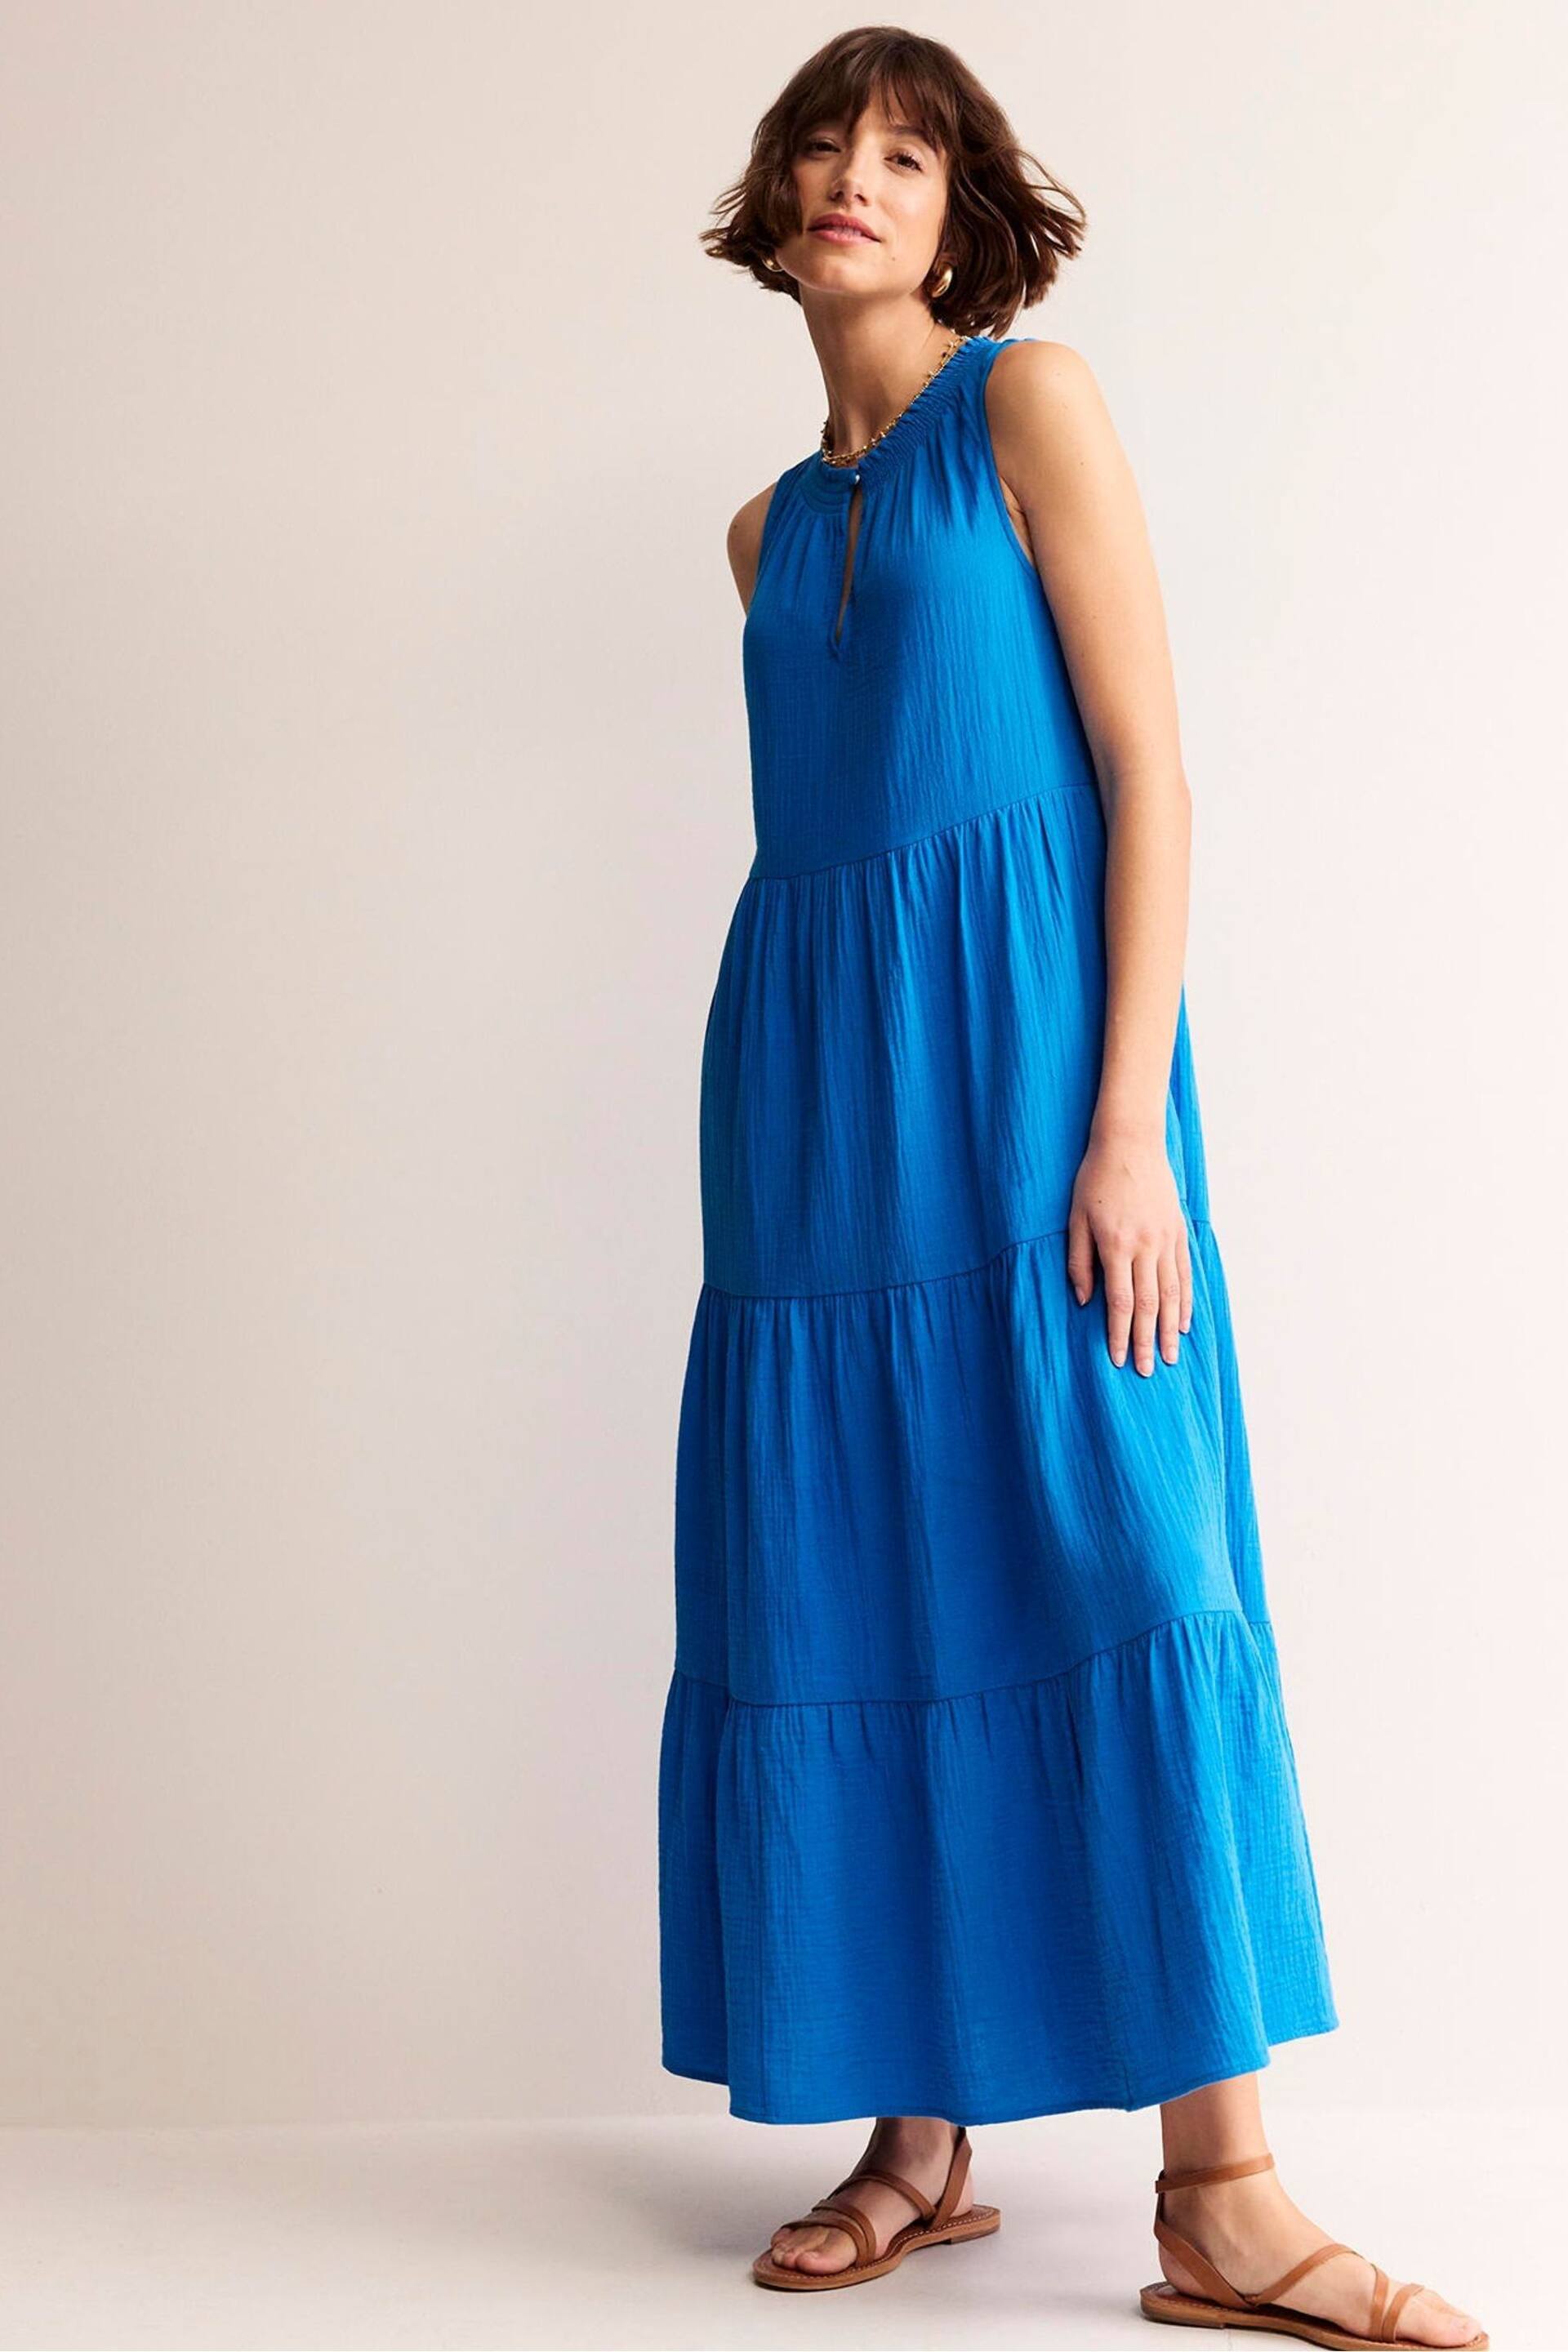 Boden Blue Double Cloth Maxi Tiered Dress - Image 2 of 6